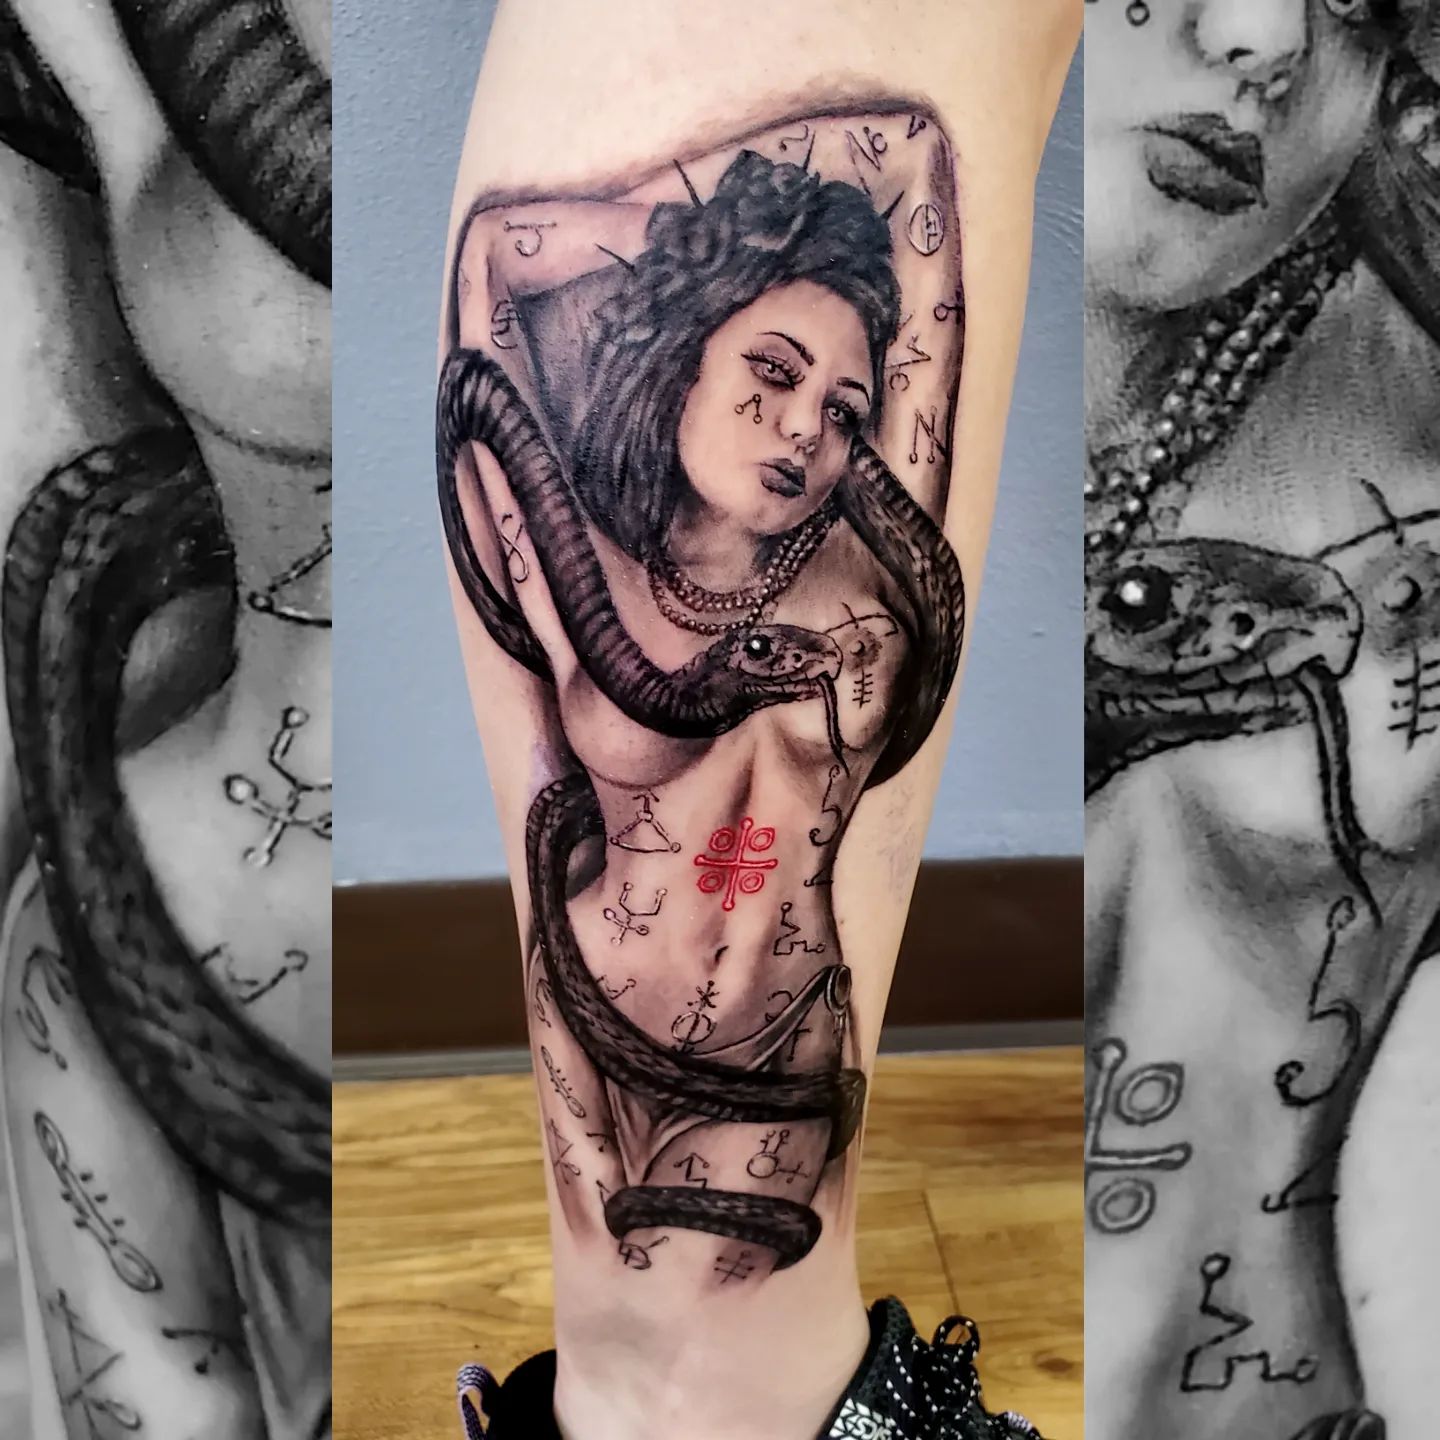 Lilith rendition done a few days ago by Justin @Jukzta There will be another session to sharpen some details and get some highlights in her. Thanks for looking!
#lilith #blackandgrey #lilithgoddess #blackandgreytattoo #realish #darkart #firstwife #demon #god #lucifer #religioustattoo #customtattoo #tattooedgirls #tattoogirl #silverbackink #Jukzta